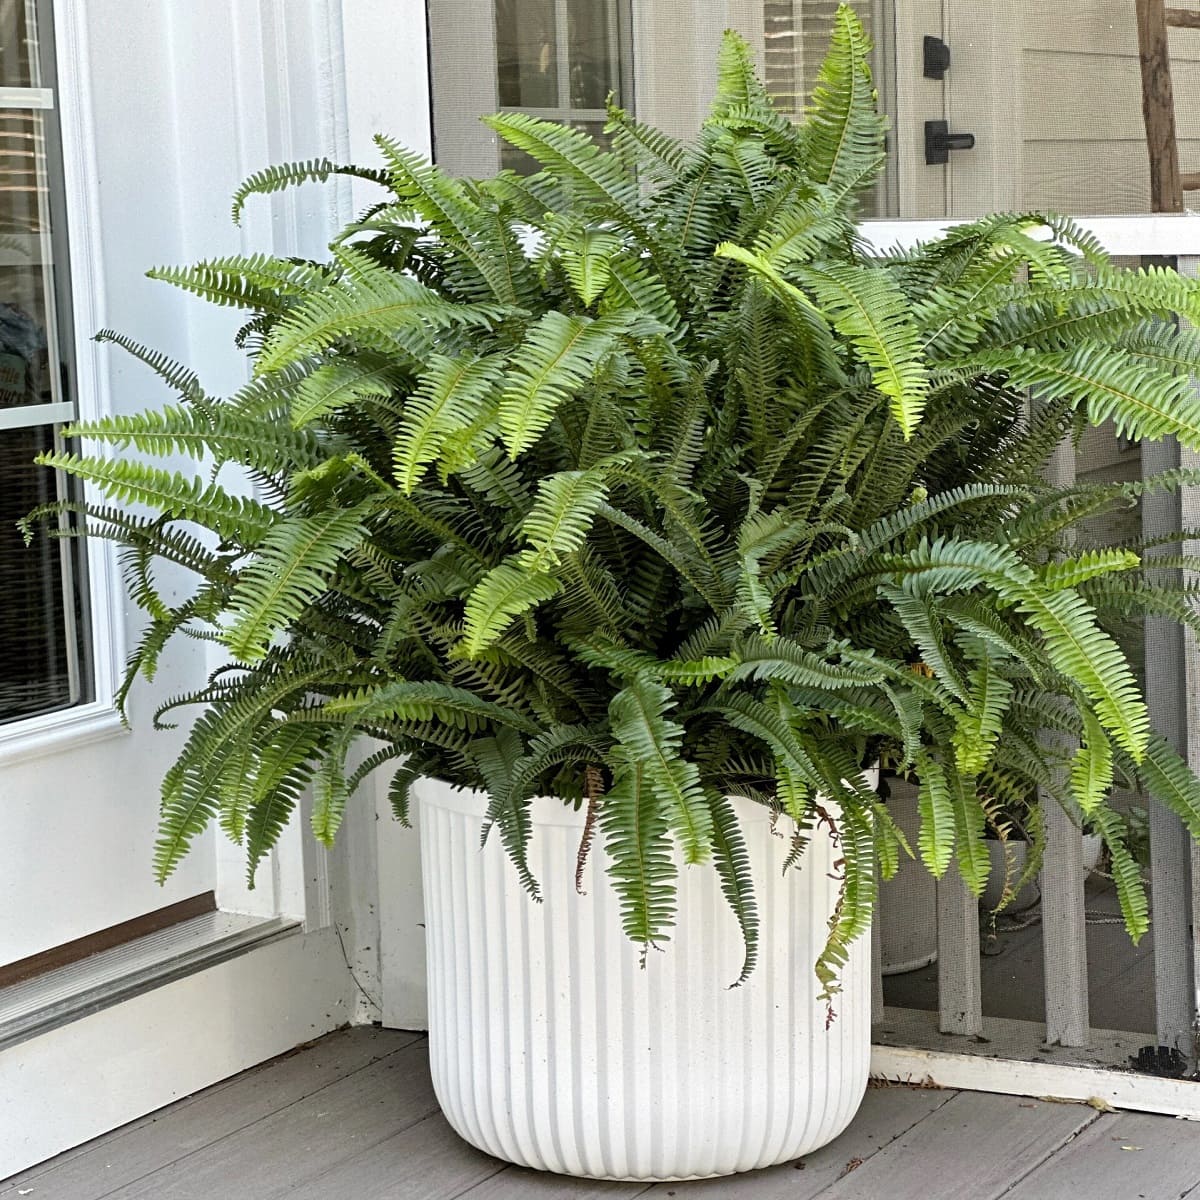 How To Winterize Outdoor Ferns